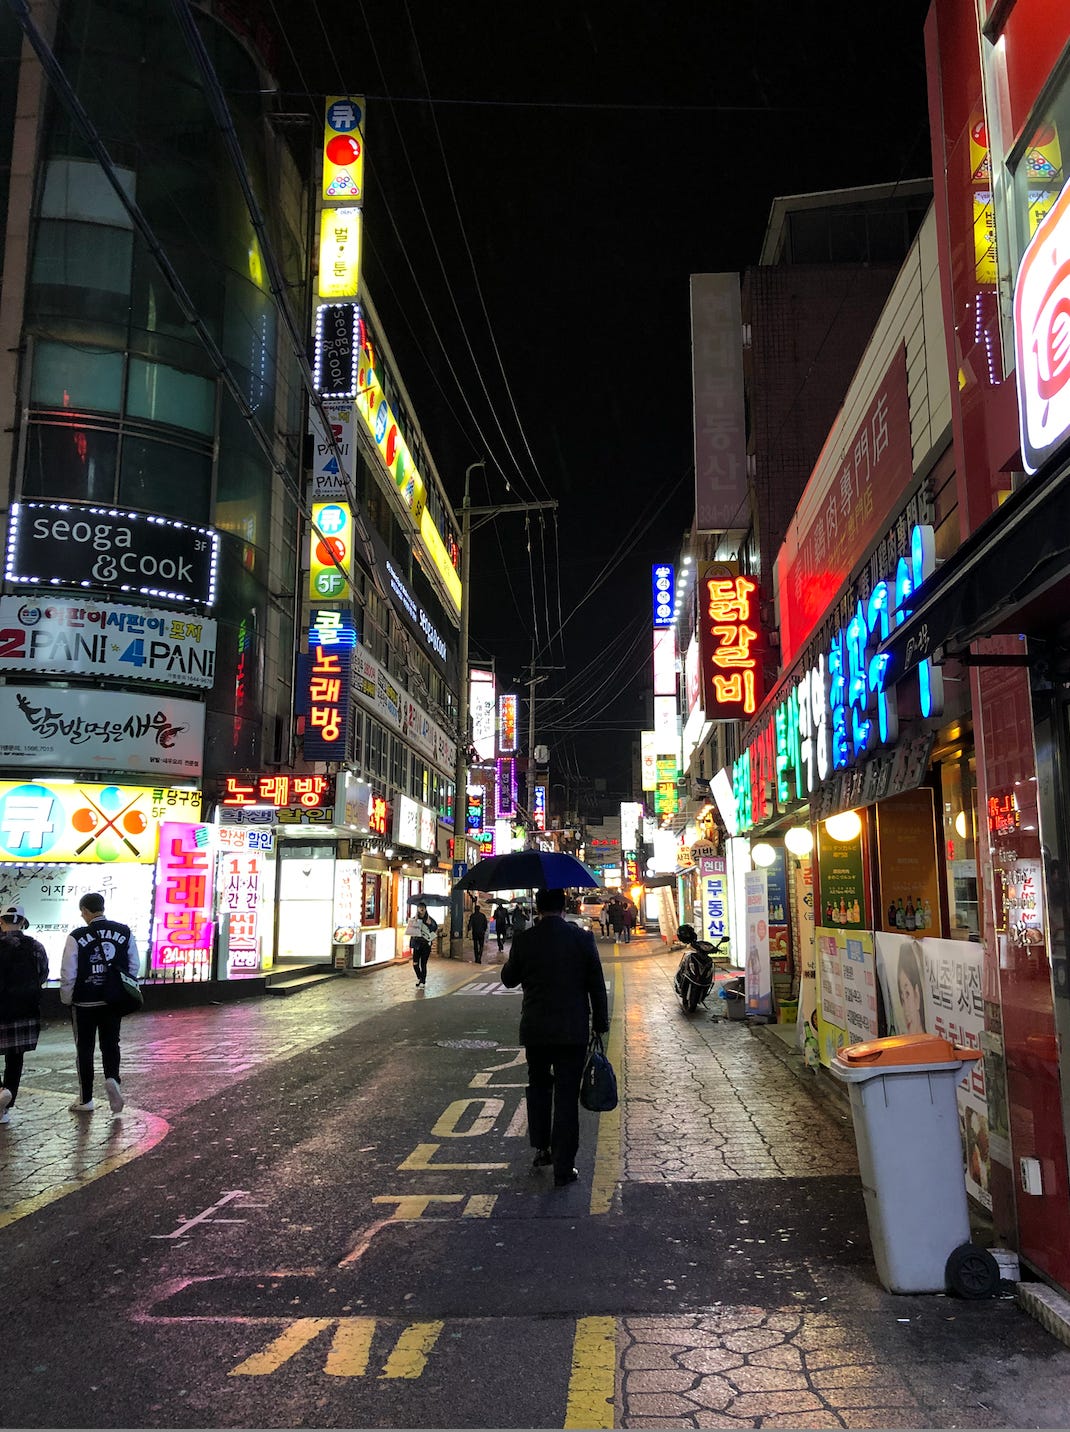 A photo of a neon-lit alley in Sinchon.